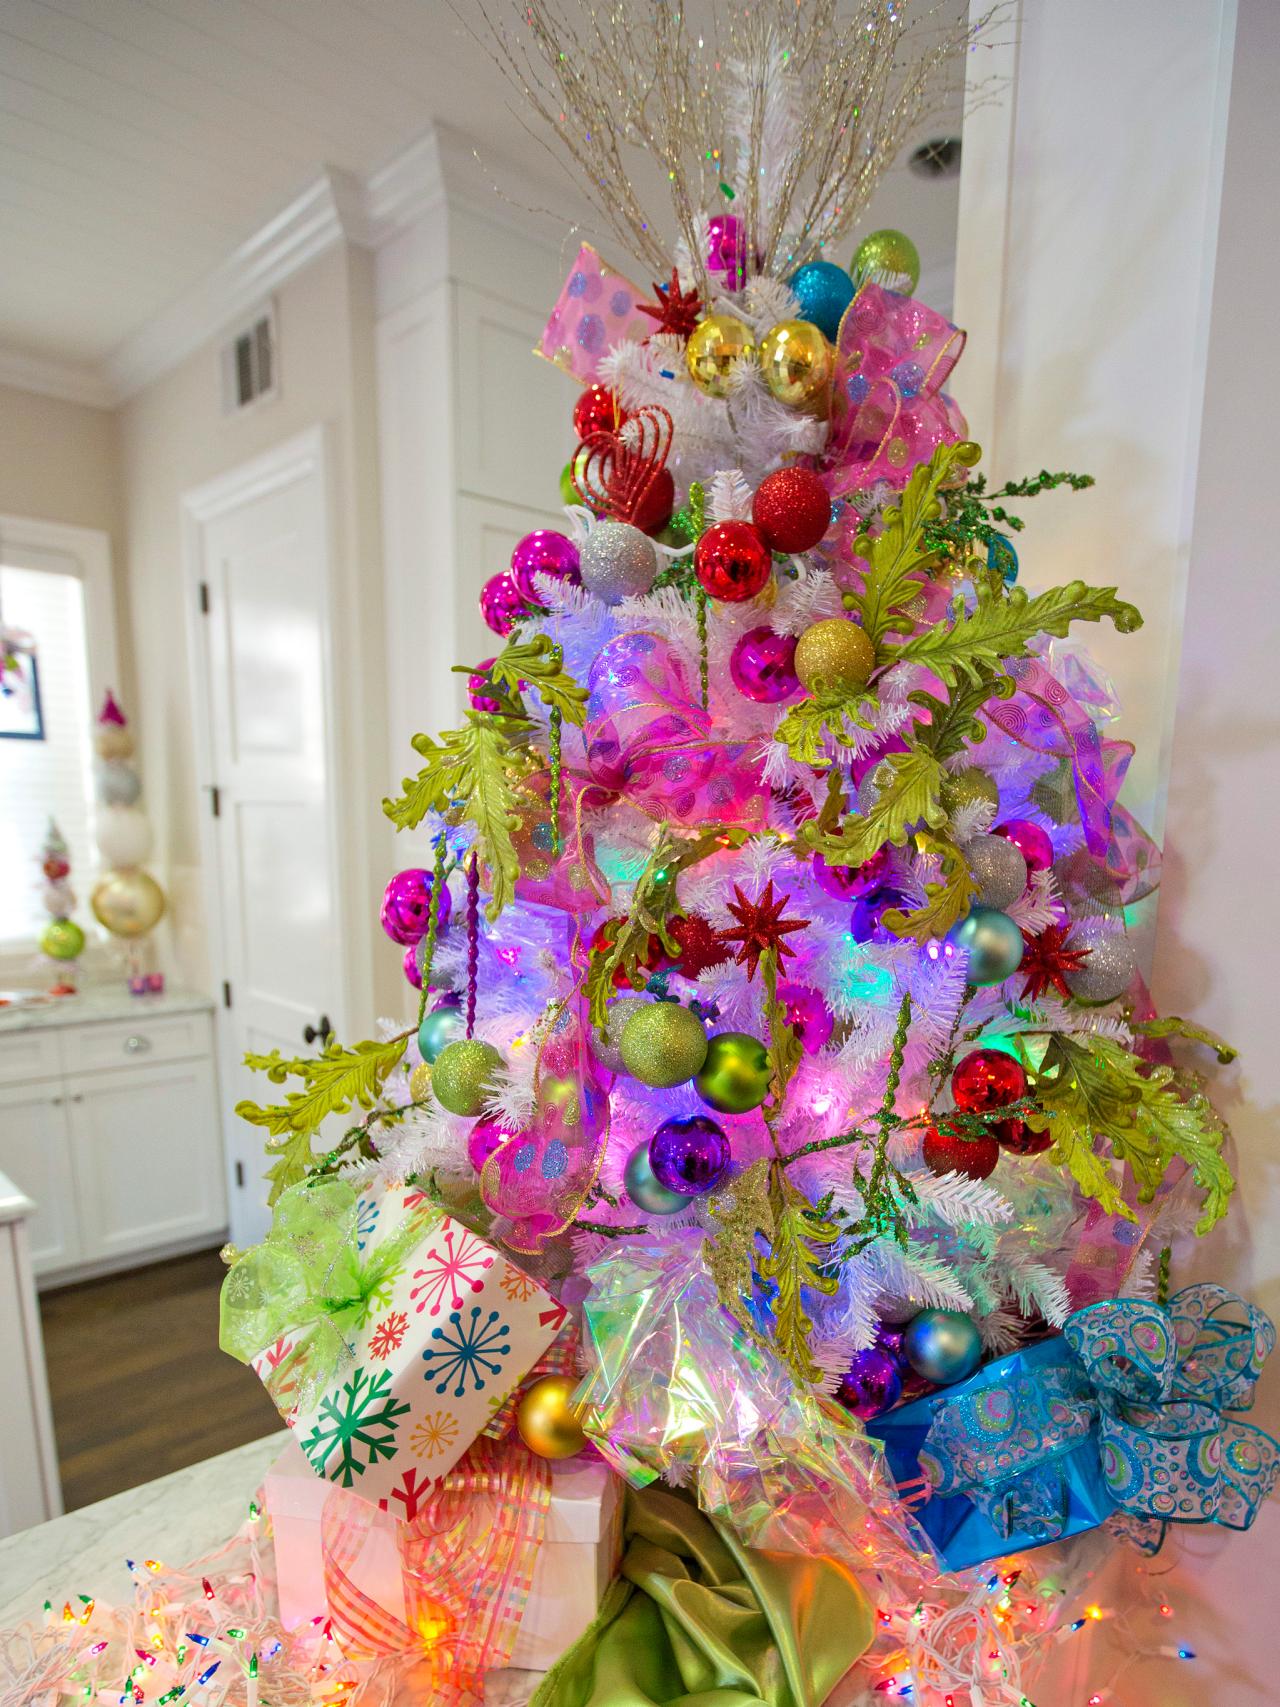 45 Colorful Christmas Tree Decorations Ideas - Decoration Love